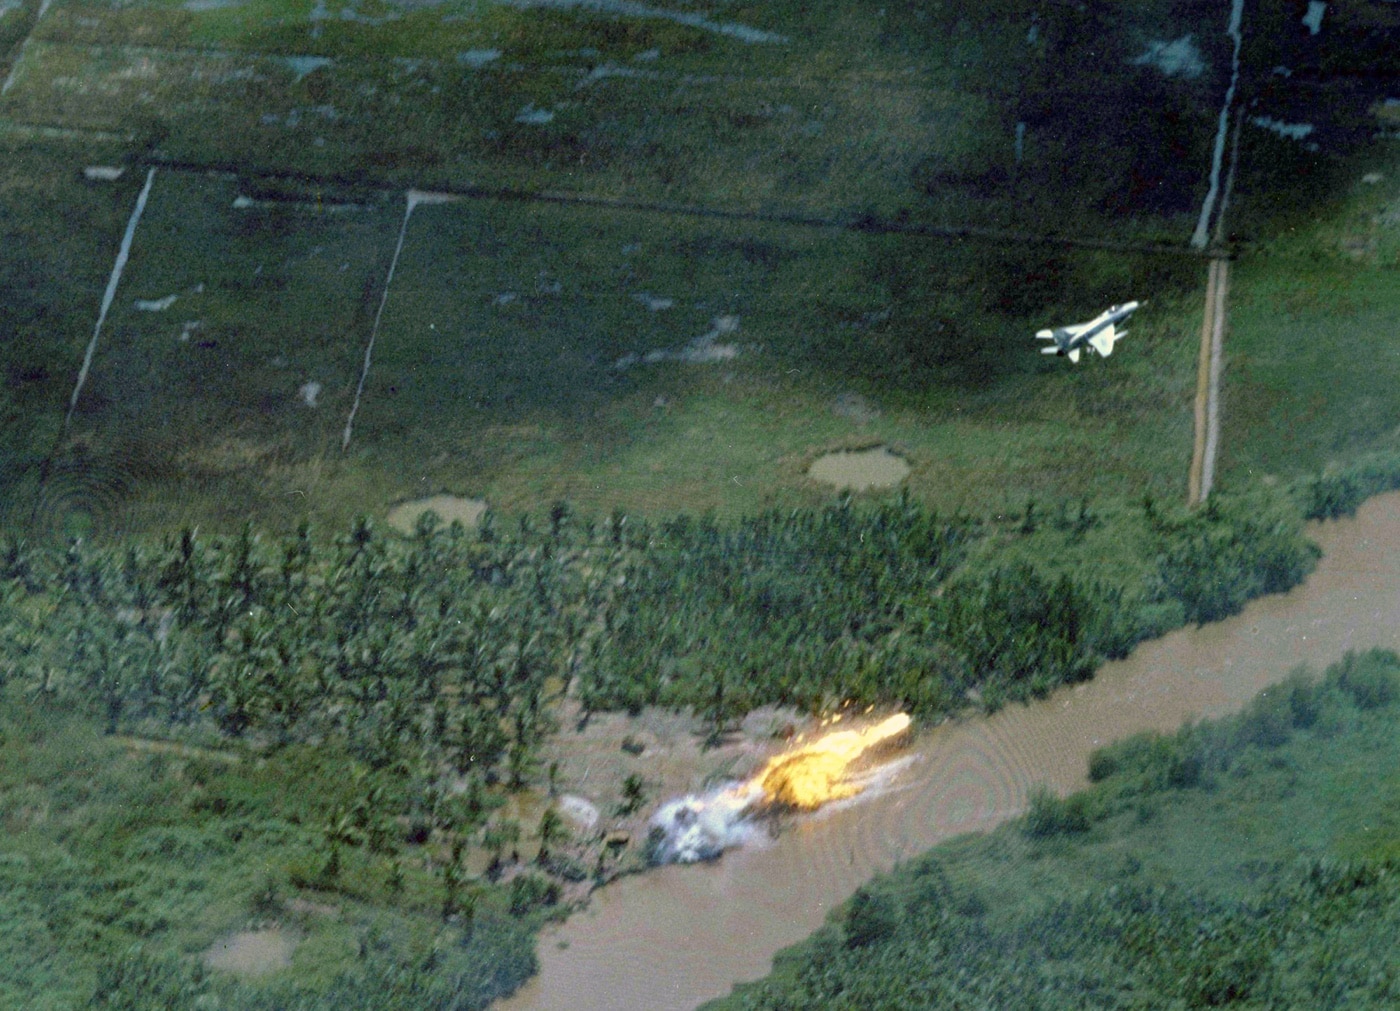 f-100d drops naplm on viet cong position in march 1966